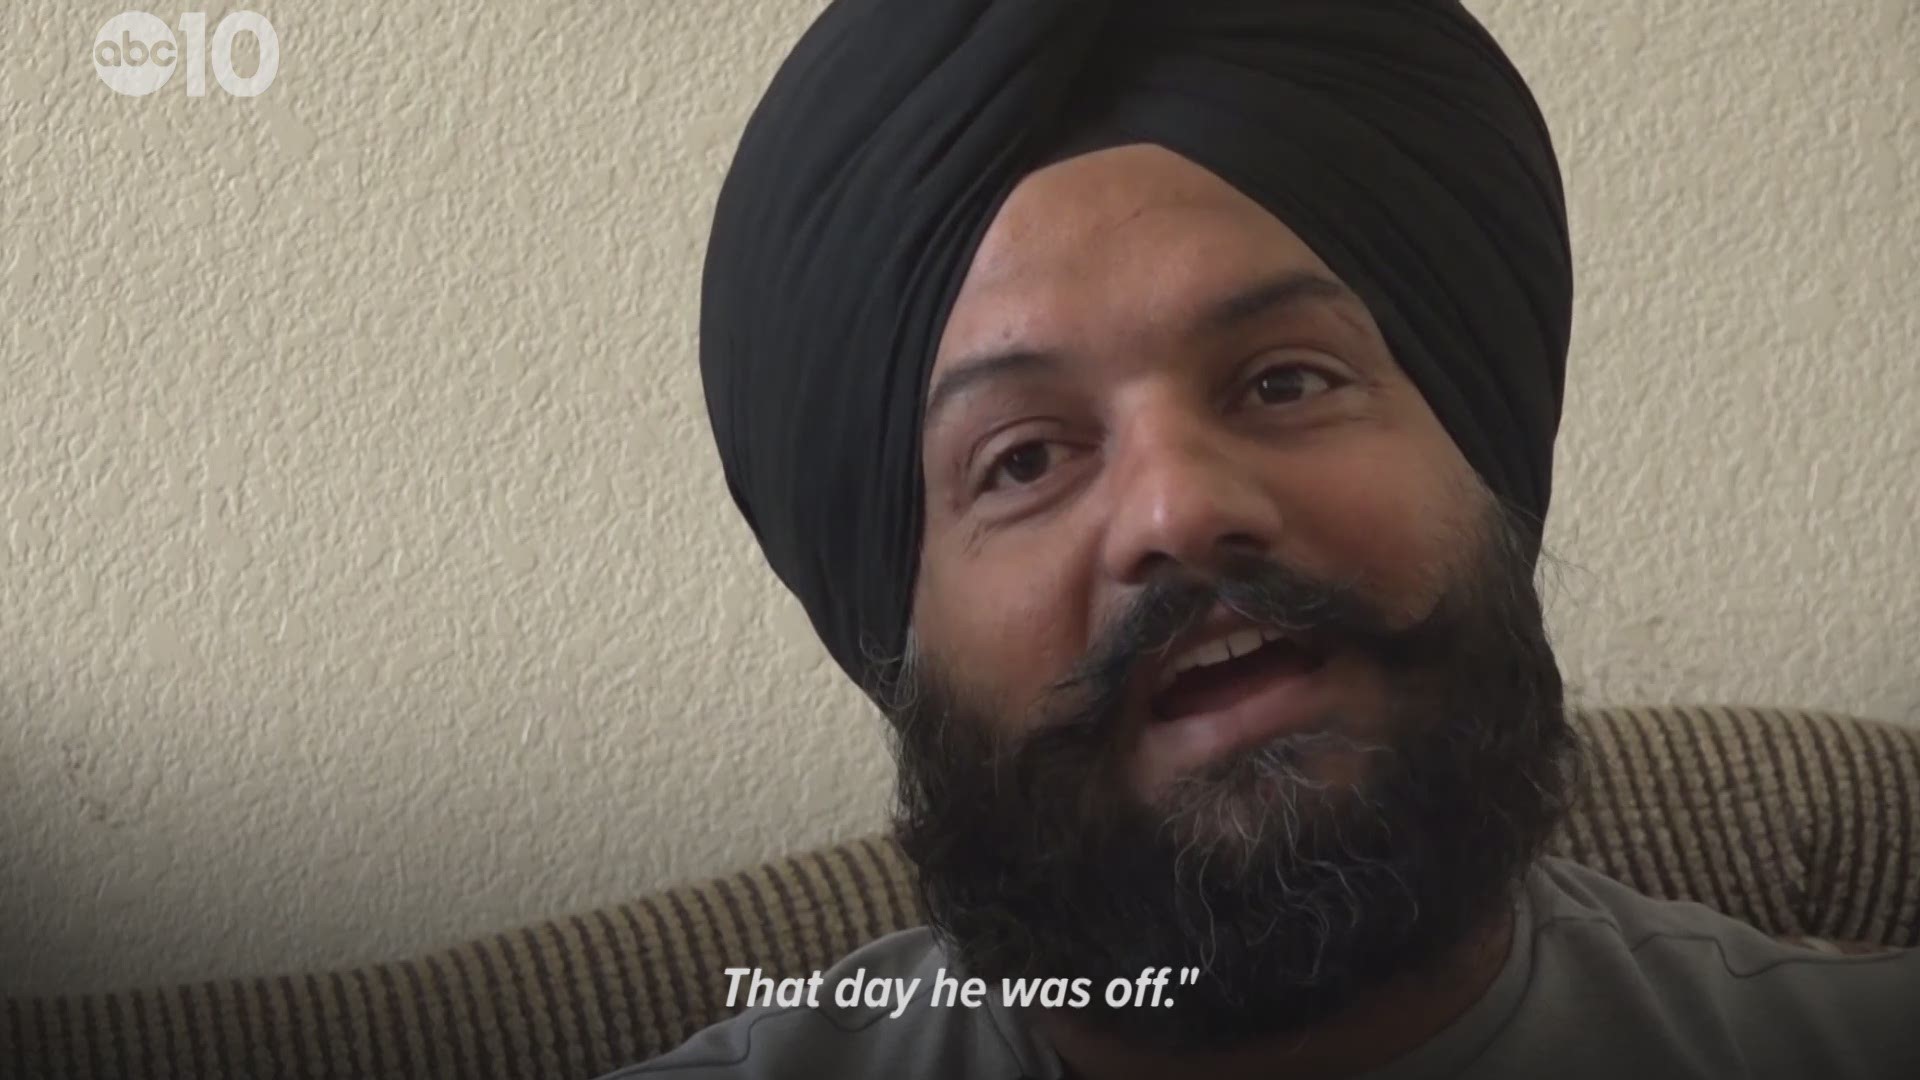 "There is no hope left for us, we lost him already," Harnek Singh Kang, the victim's son-in-law said. "We never expected that he was going to die like this."

Police say 64-year-old Parmjit Singh of Tracy was brutally stabbed while he was on his evening walk in Gretchen Talley Park on Aug. 25 around 9 p.m.